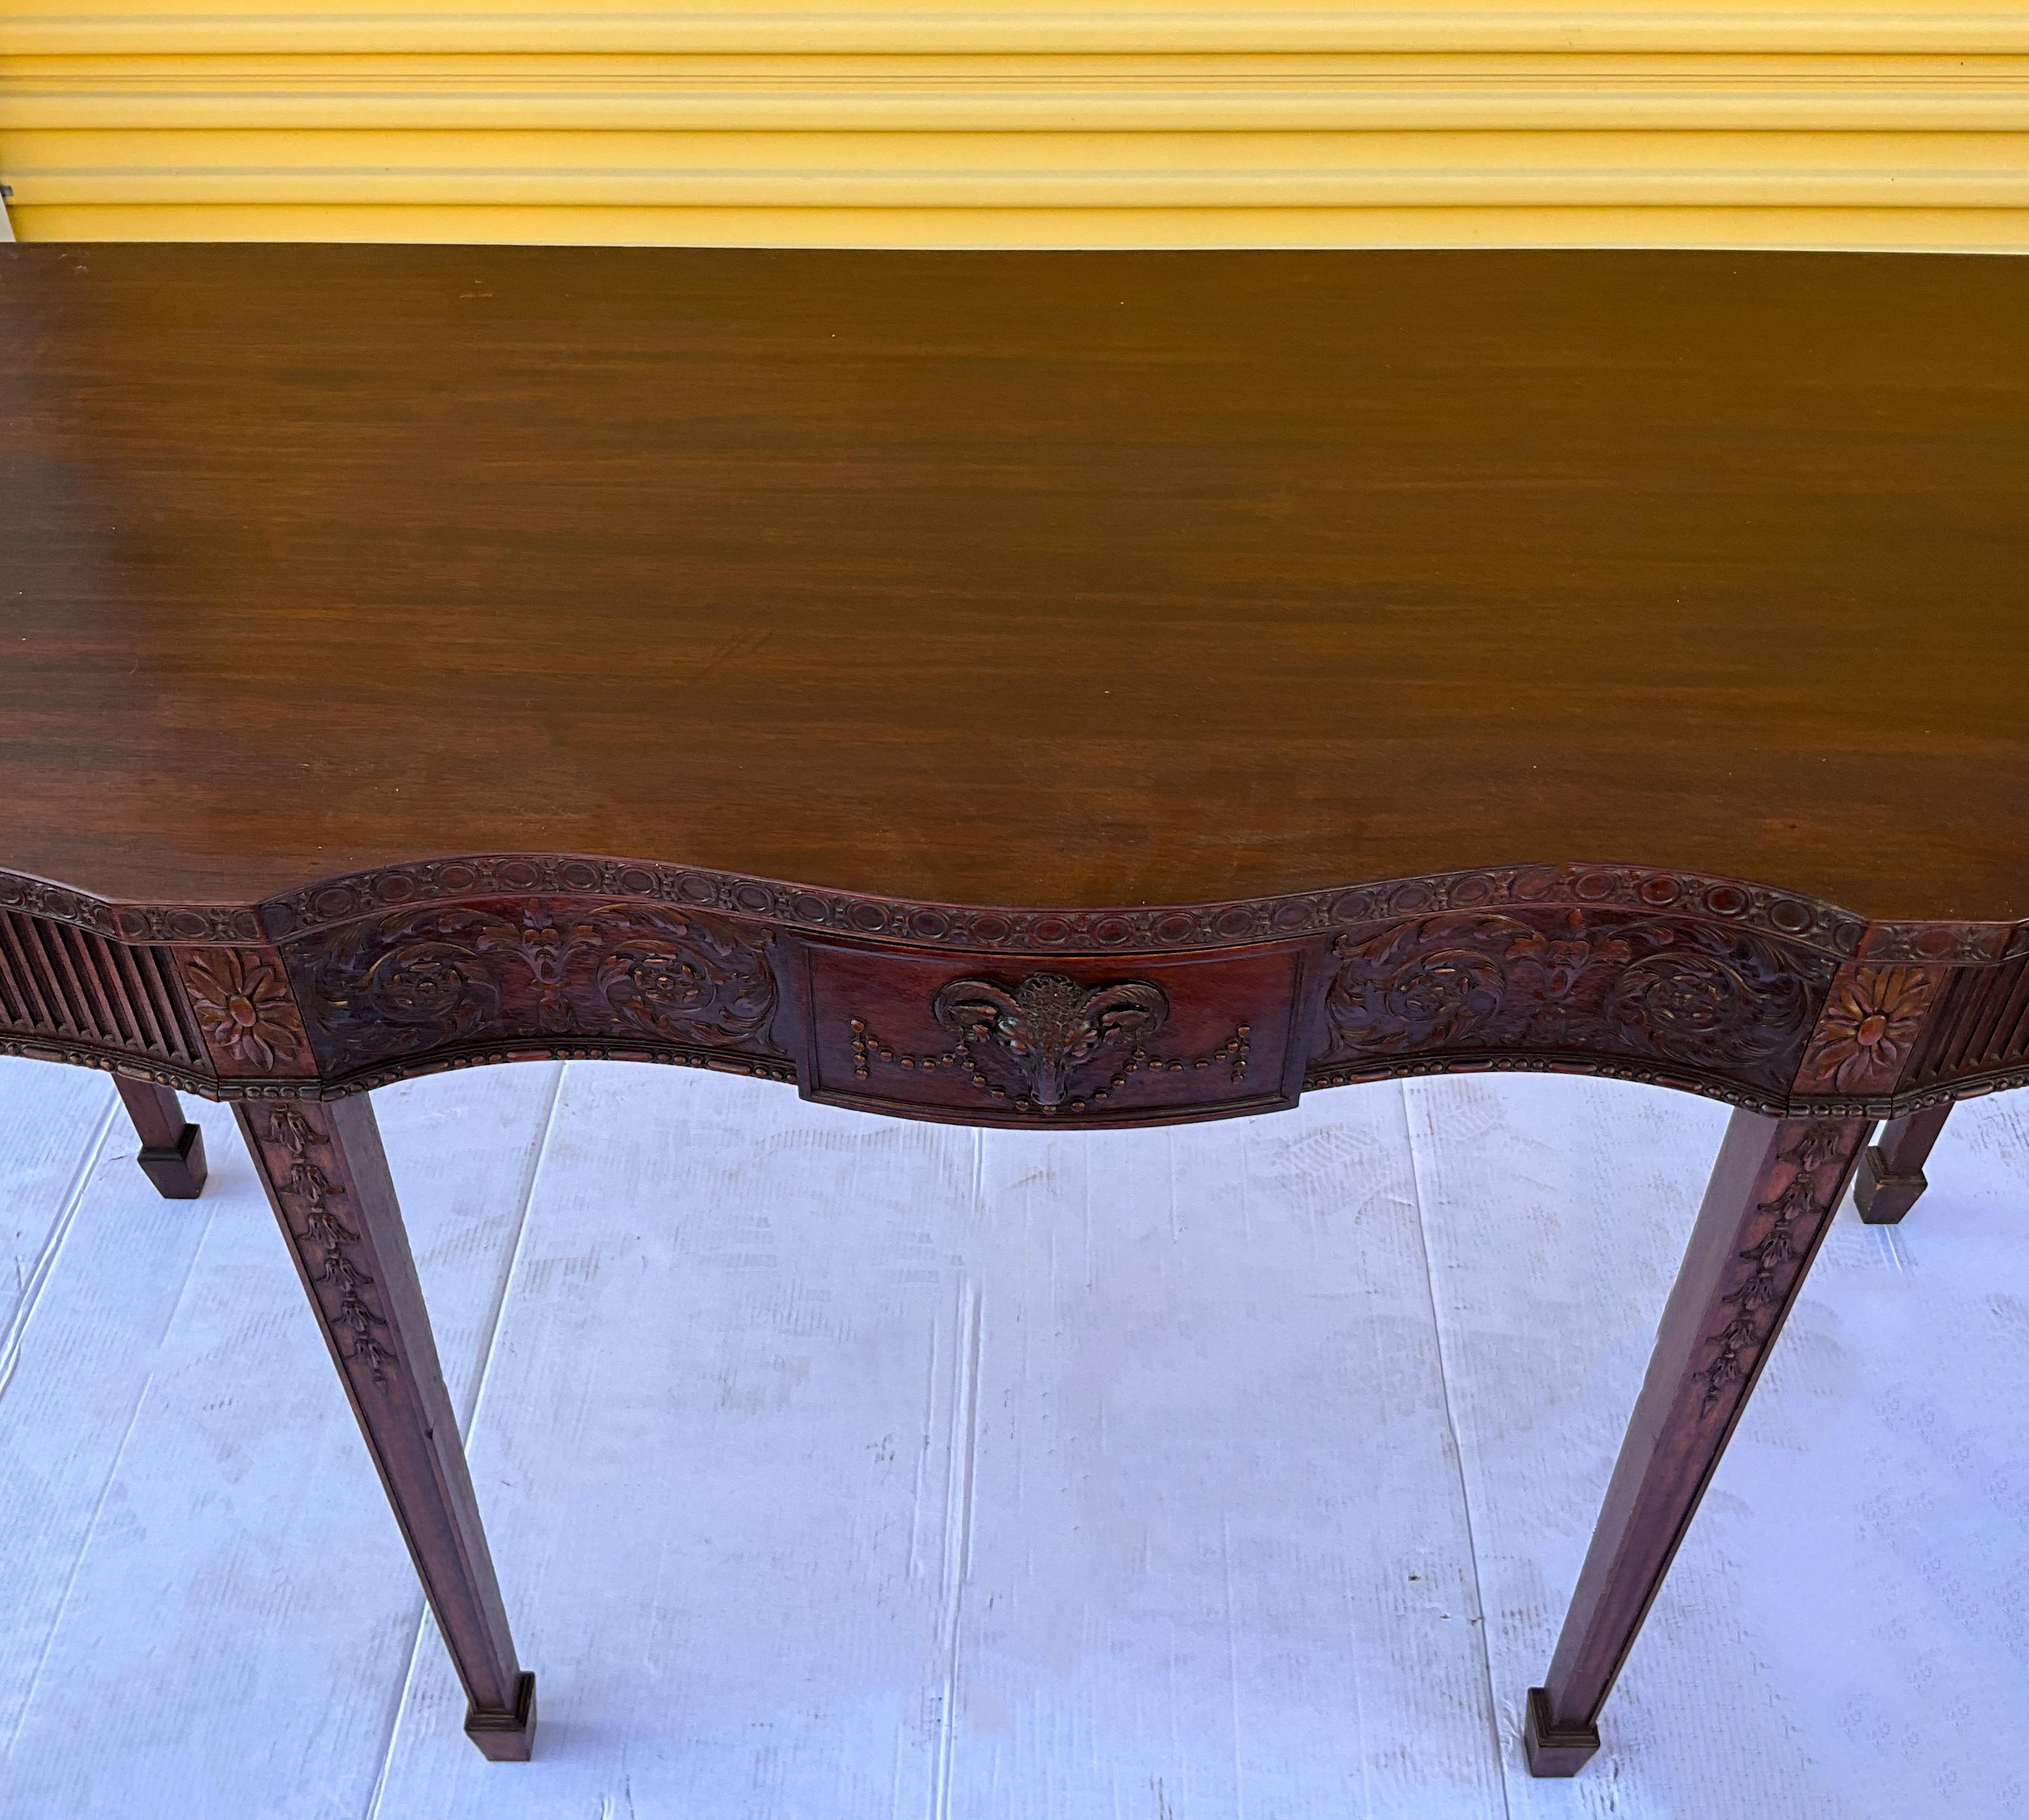 1940s Neoclassical Style Carved Mahogany Huntboard / Console Table / Server In Good Condition For Sale In Kennesaw, GA